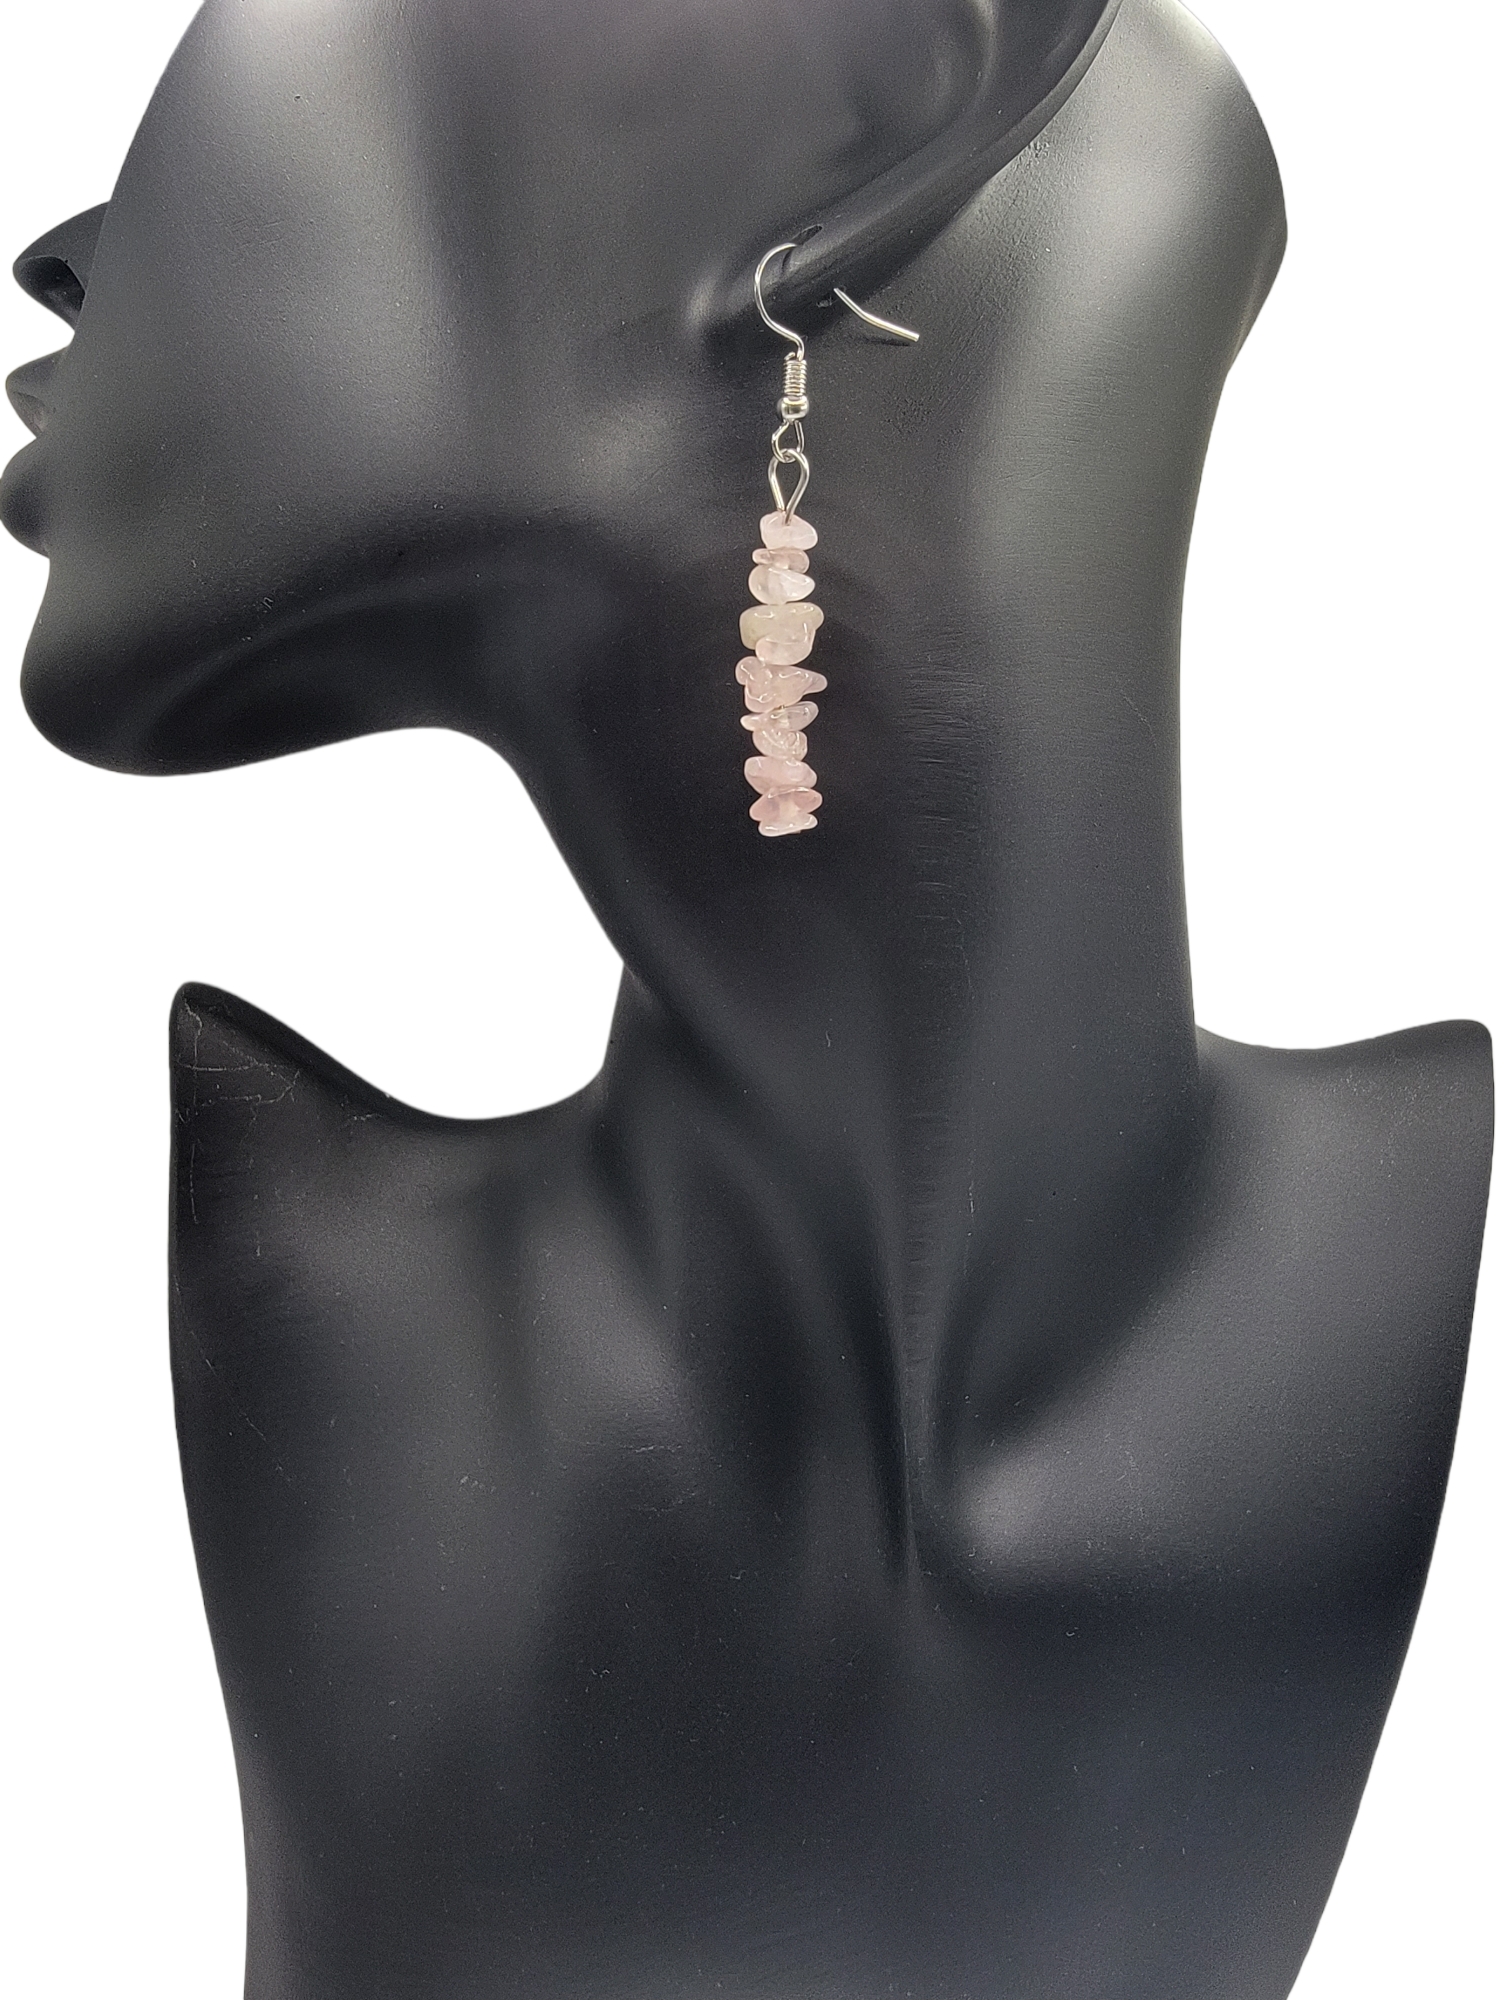 black  face silhouette with rose quartz chip dangle earring hanging from ear